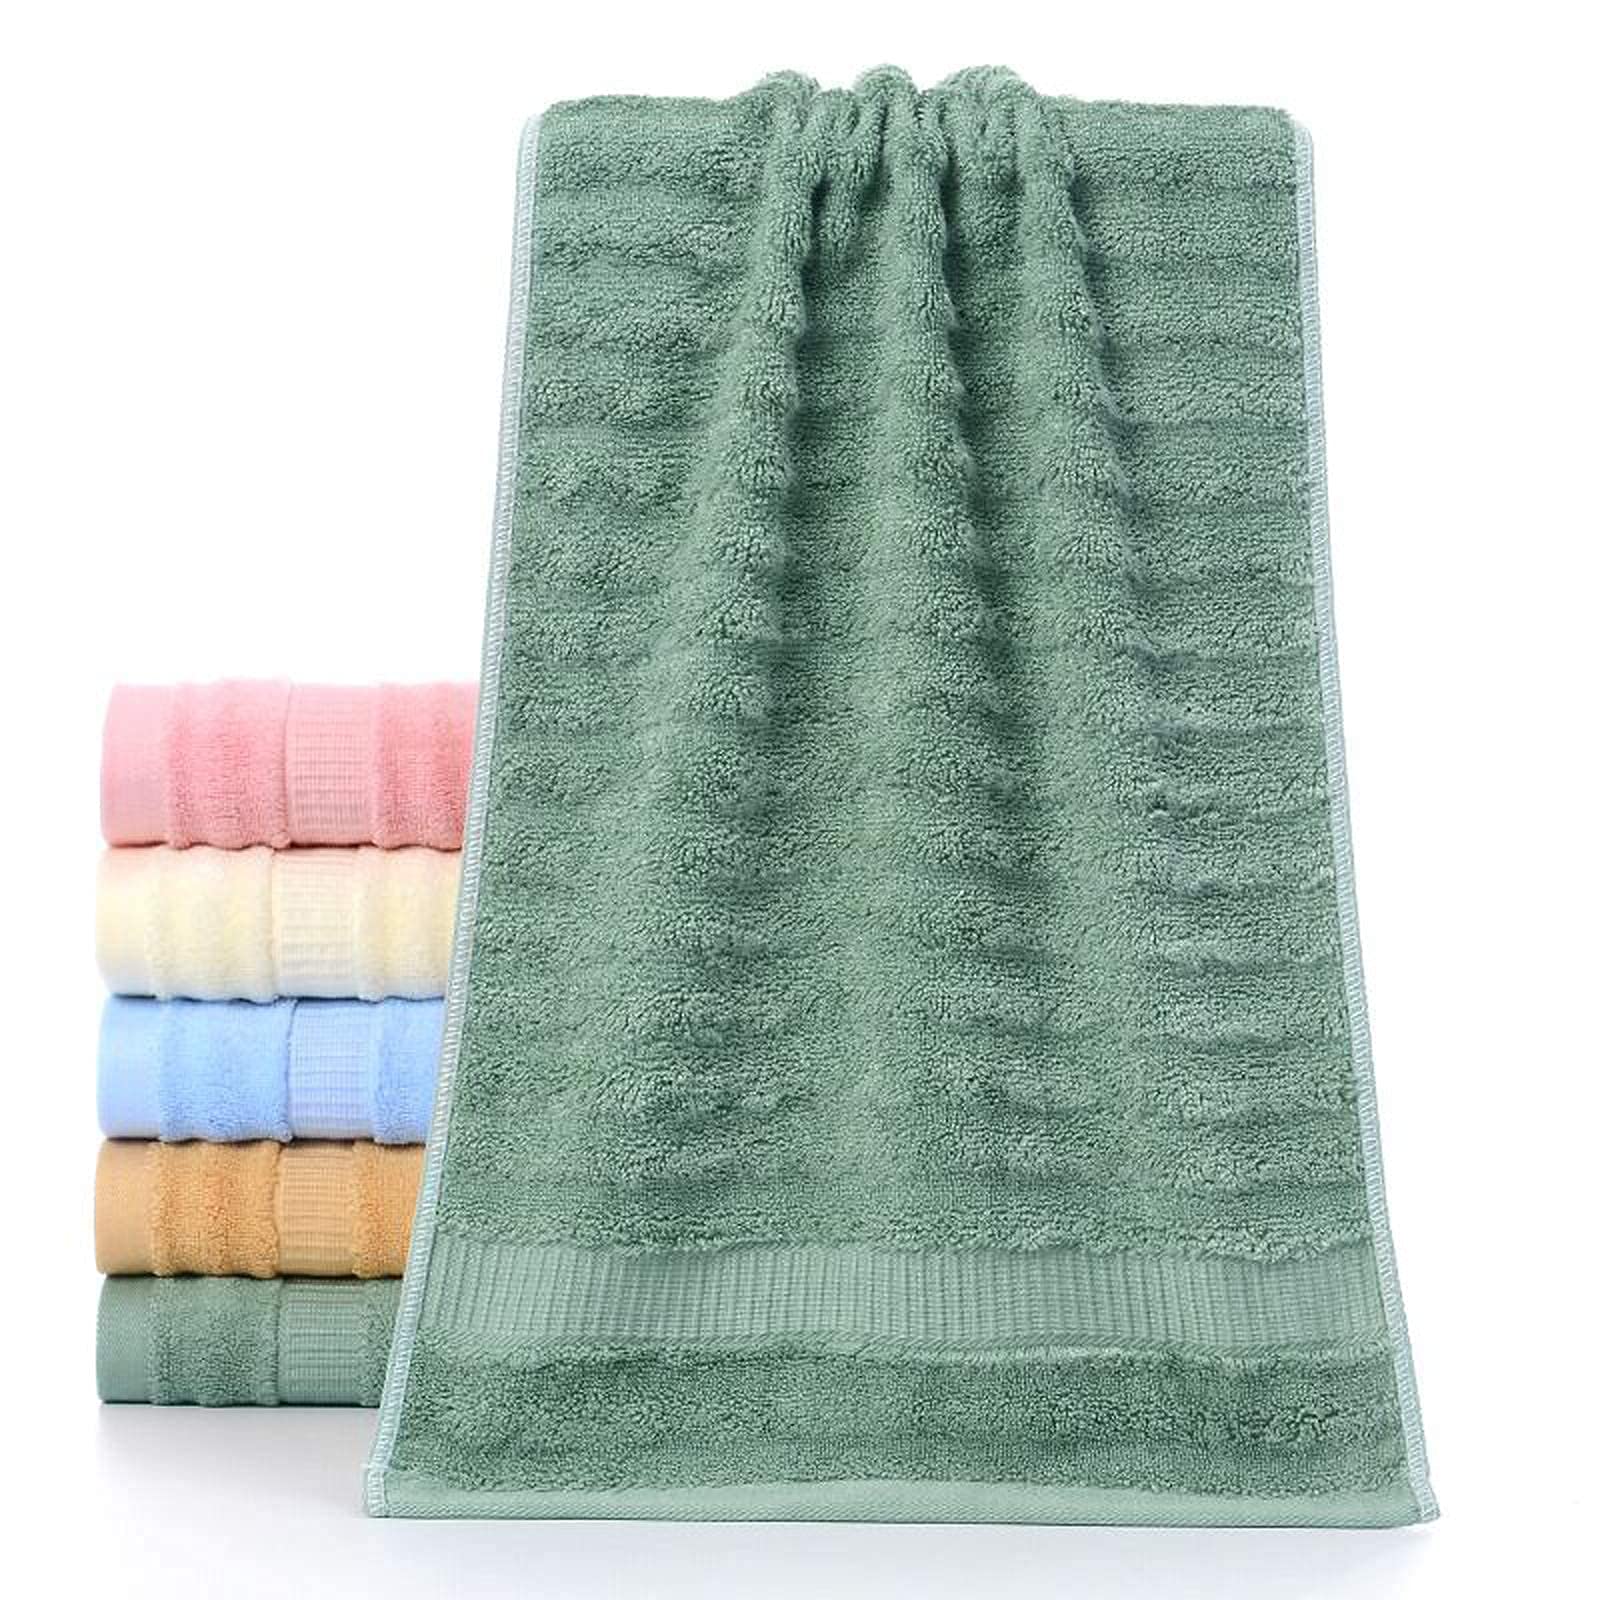 Mush Bamboo Towels for Bath Large Size | 600 GSM Bath Towel for Men & Women | Soft, Highly Absorbent, Quick Dry,and Anti Microbial | 75 X 150 cms (Pack of 1, Olive Green)